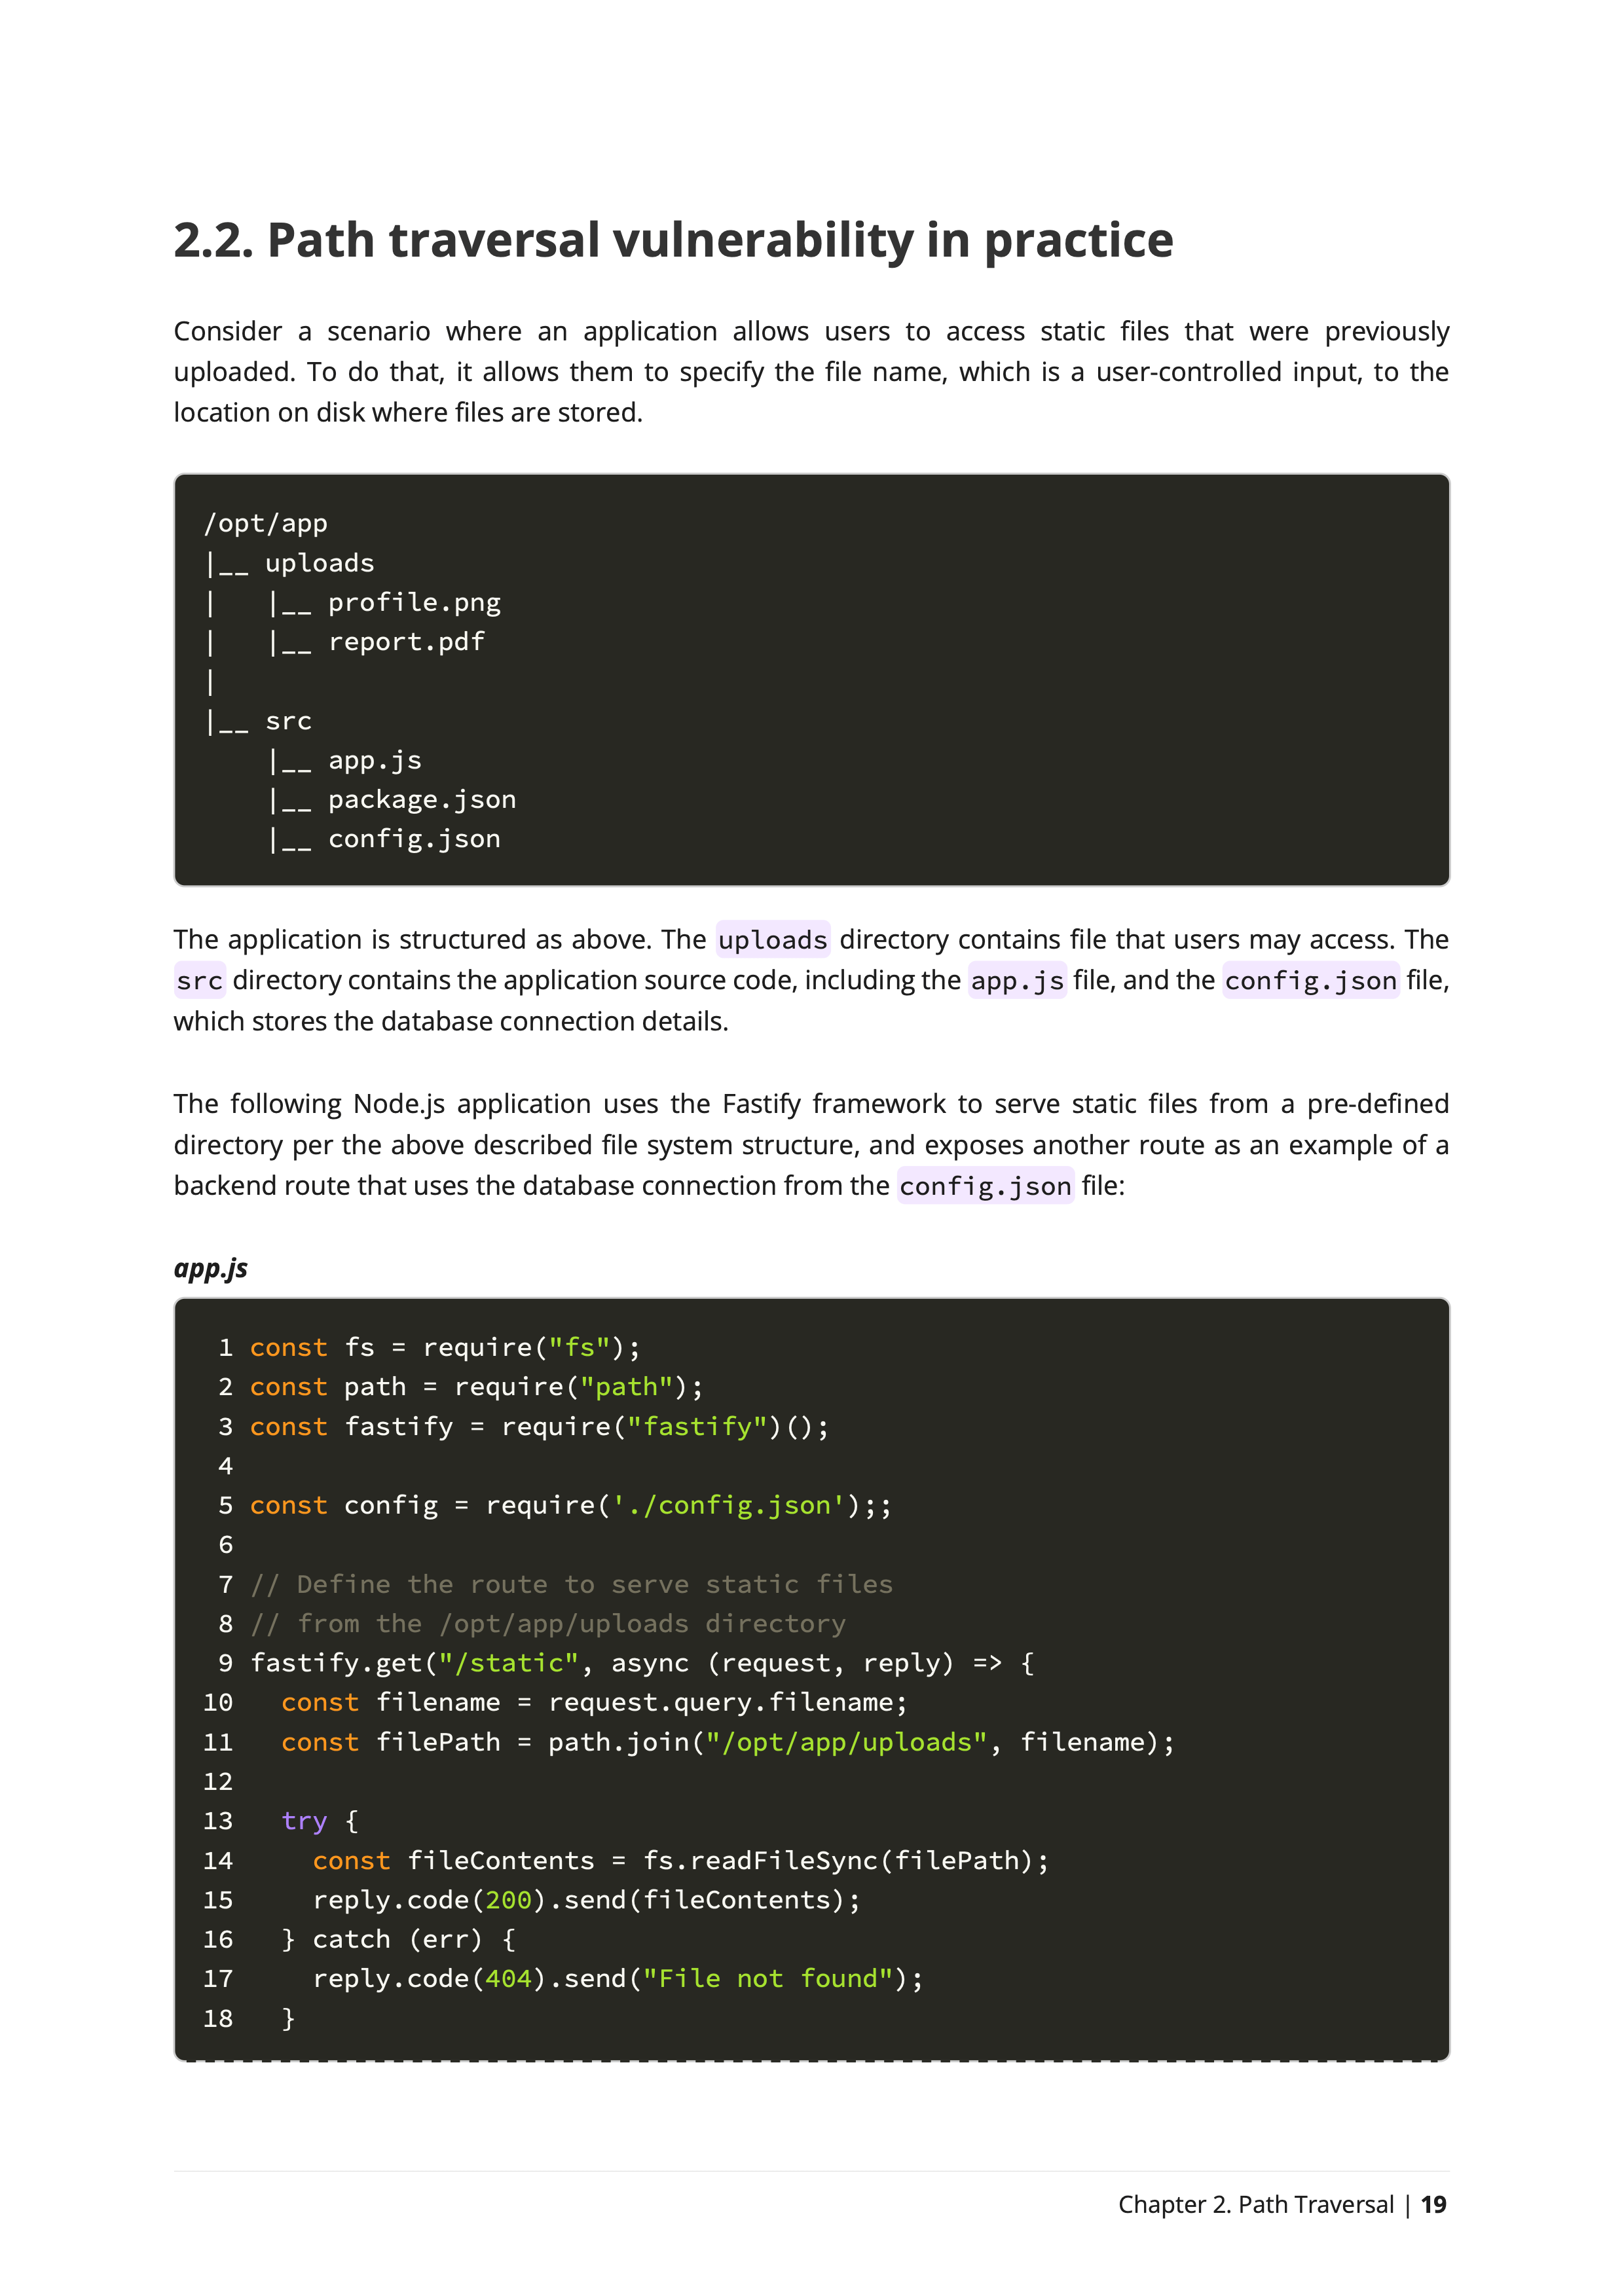 Path Traversal book vulnerability in practice code example